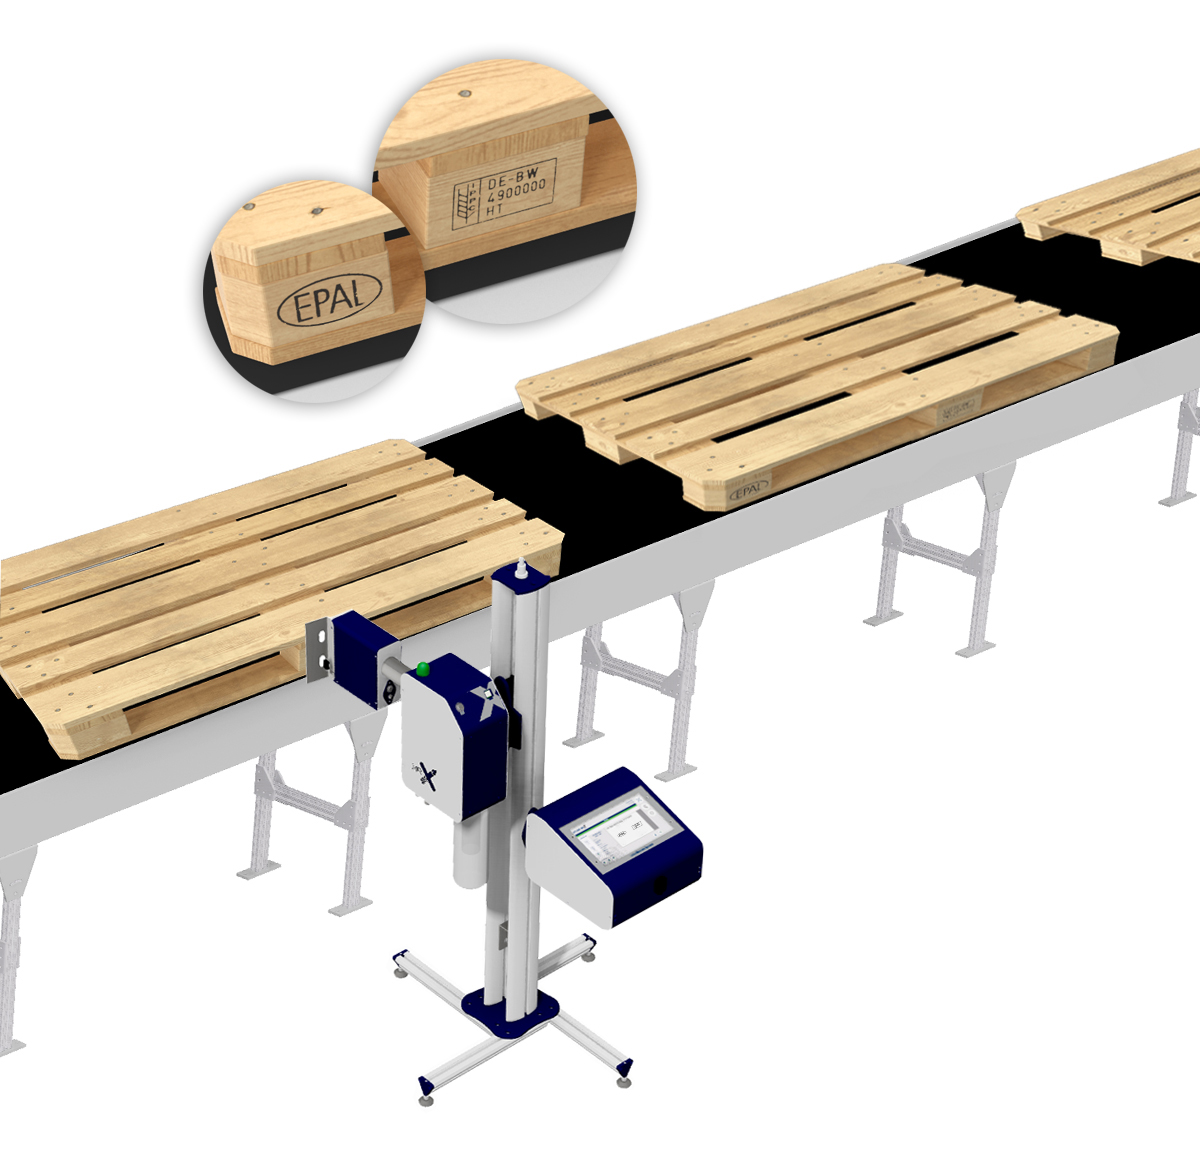 epal-pallet-identification-end-of-production-line